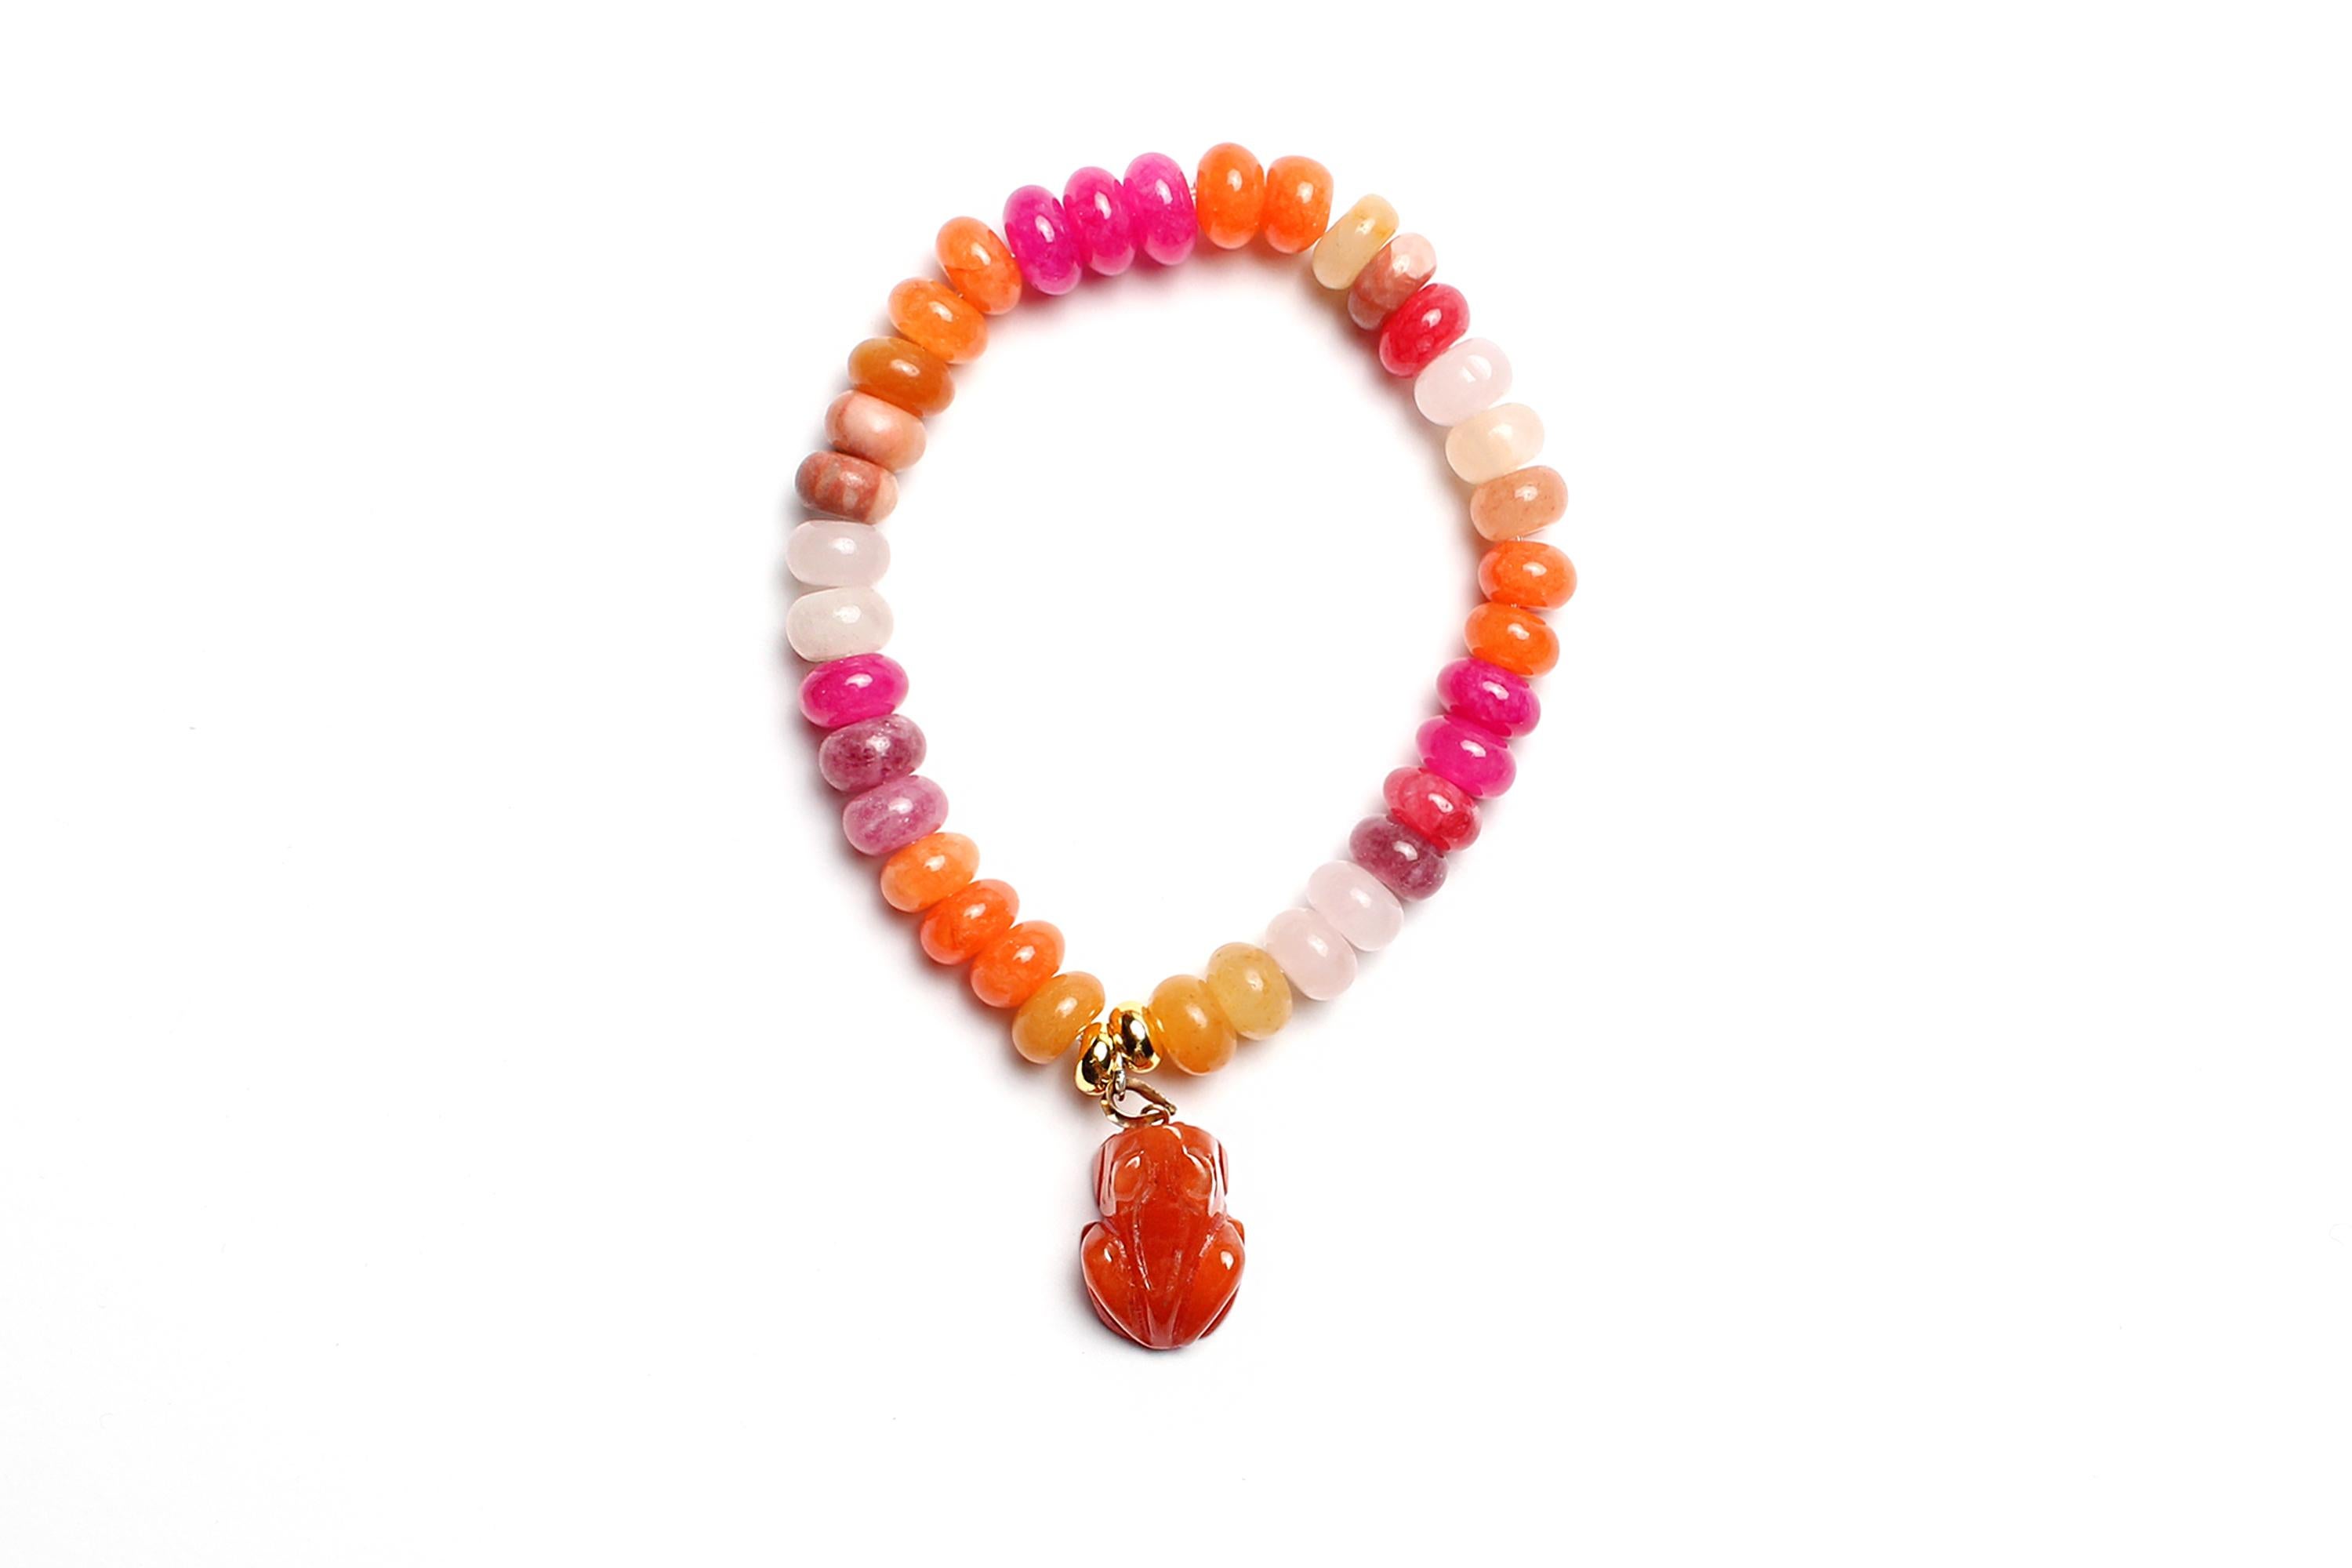 This bright beaded bracelet can be added to your collection of bracelets and fits perfectly with additional CLARISSA BRONFMAN beaded bracelets from our collection!

Perfect to brighten up your look and accessorize for anytime of the year.

7